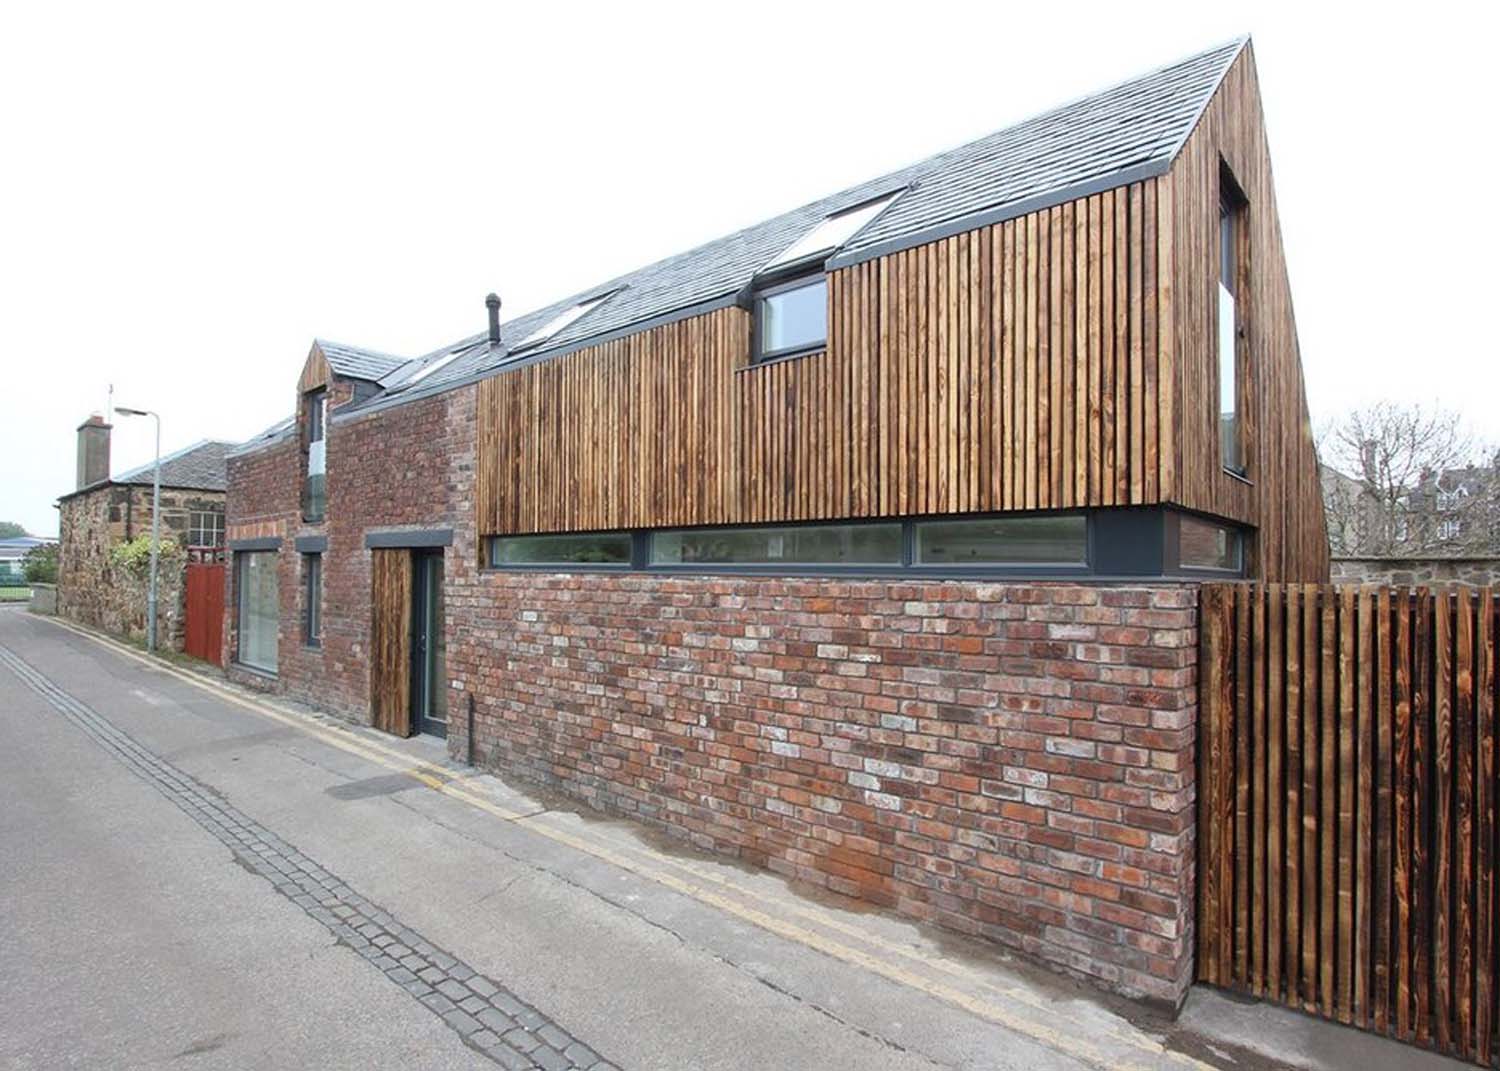 A street view of a house on Rosefield Avenue Lane with a ground floor red brick facade. Vertical timber slats cover the first floor and garage doors.